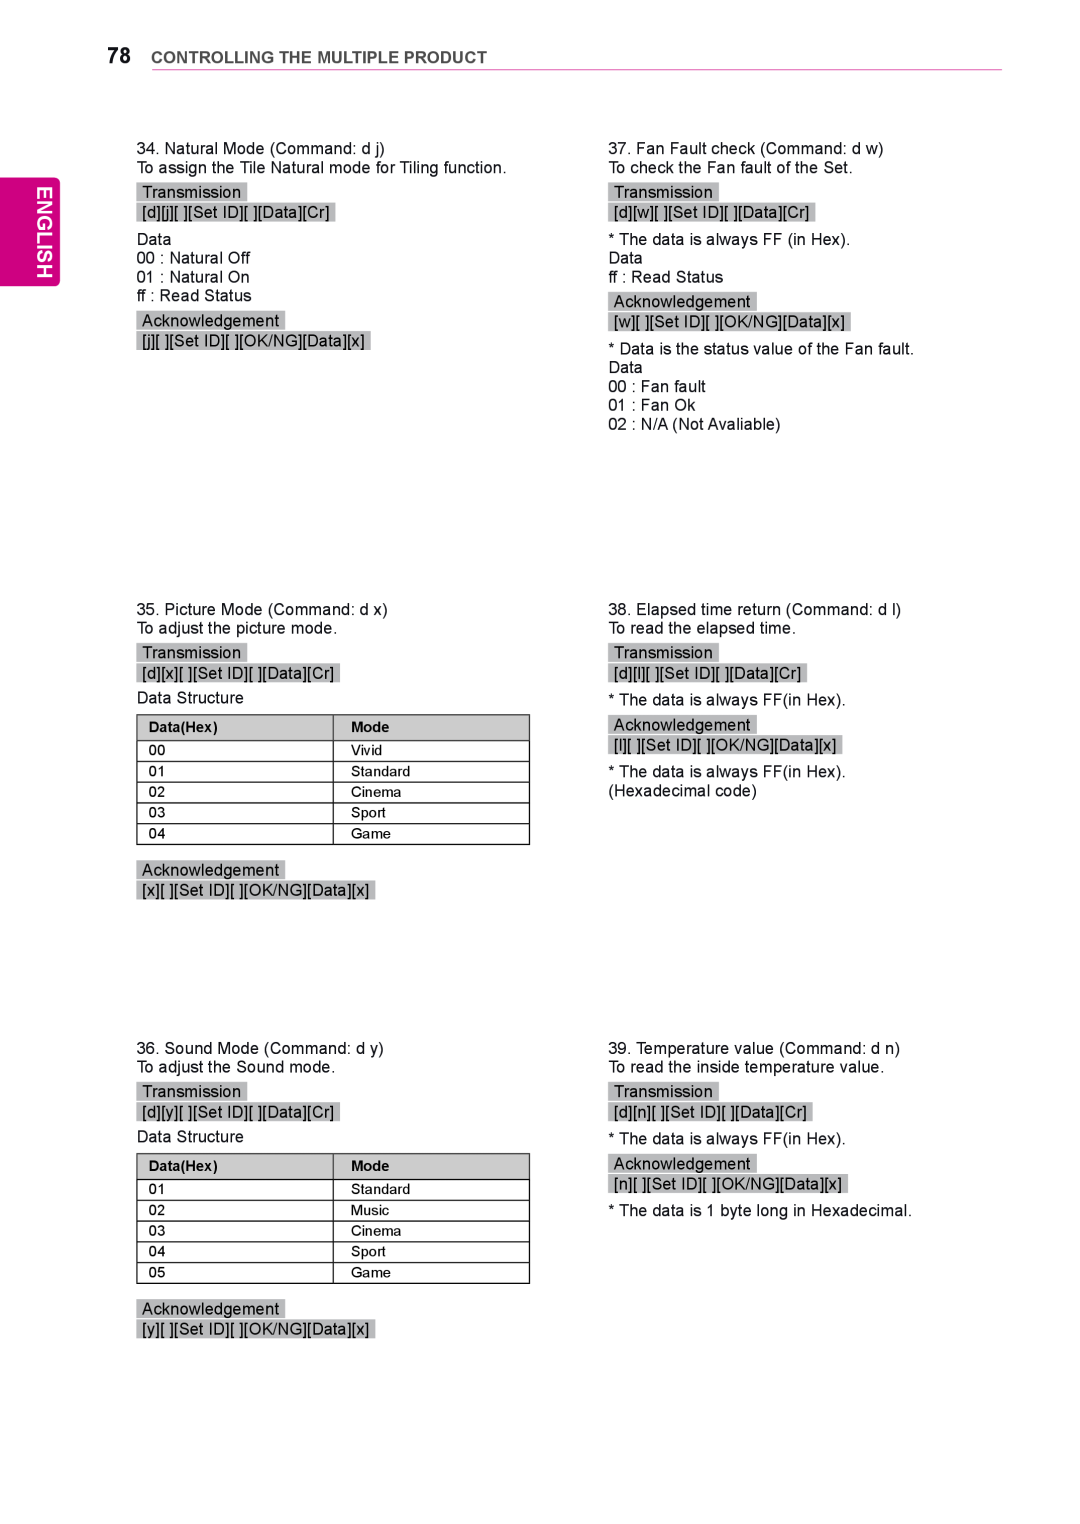 LG Electronics 42WS10, 47WS10, 55WS10 owner manual English, Controlling The Multiple Product 